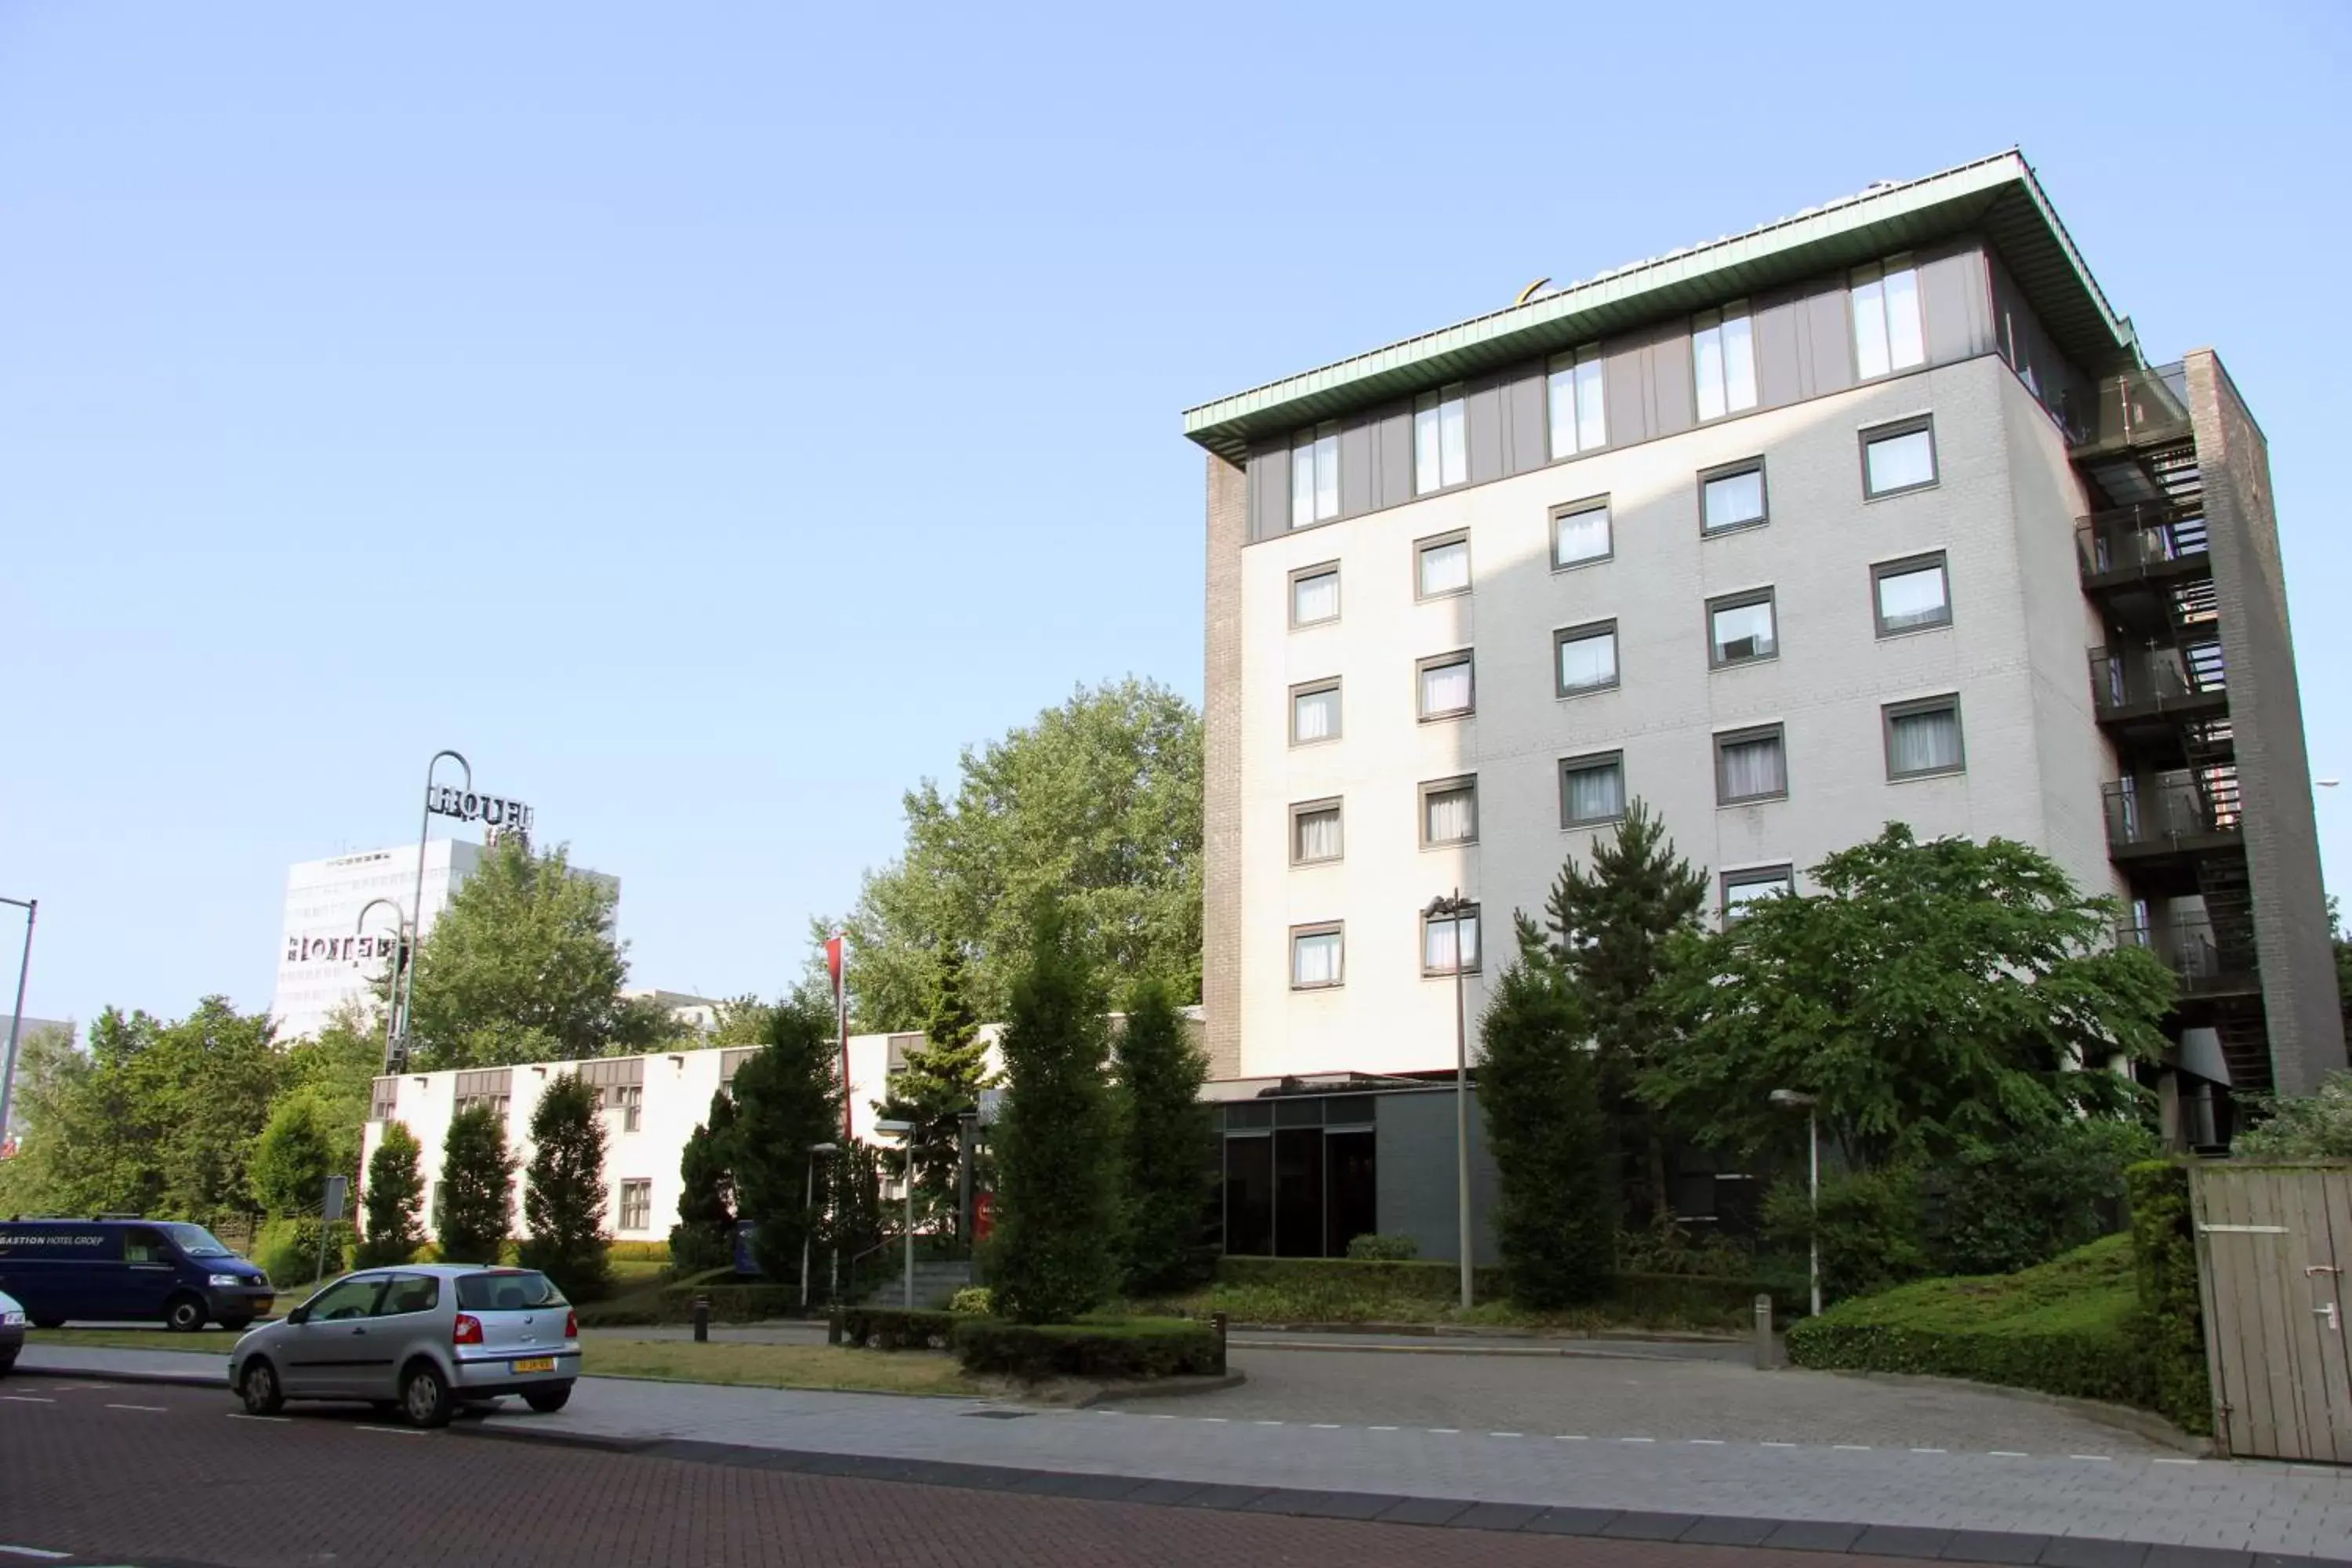 Property Building in Bastion Hotel Amsterdam Zuidwest